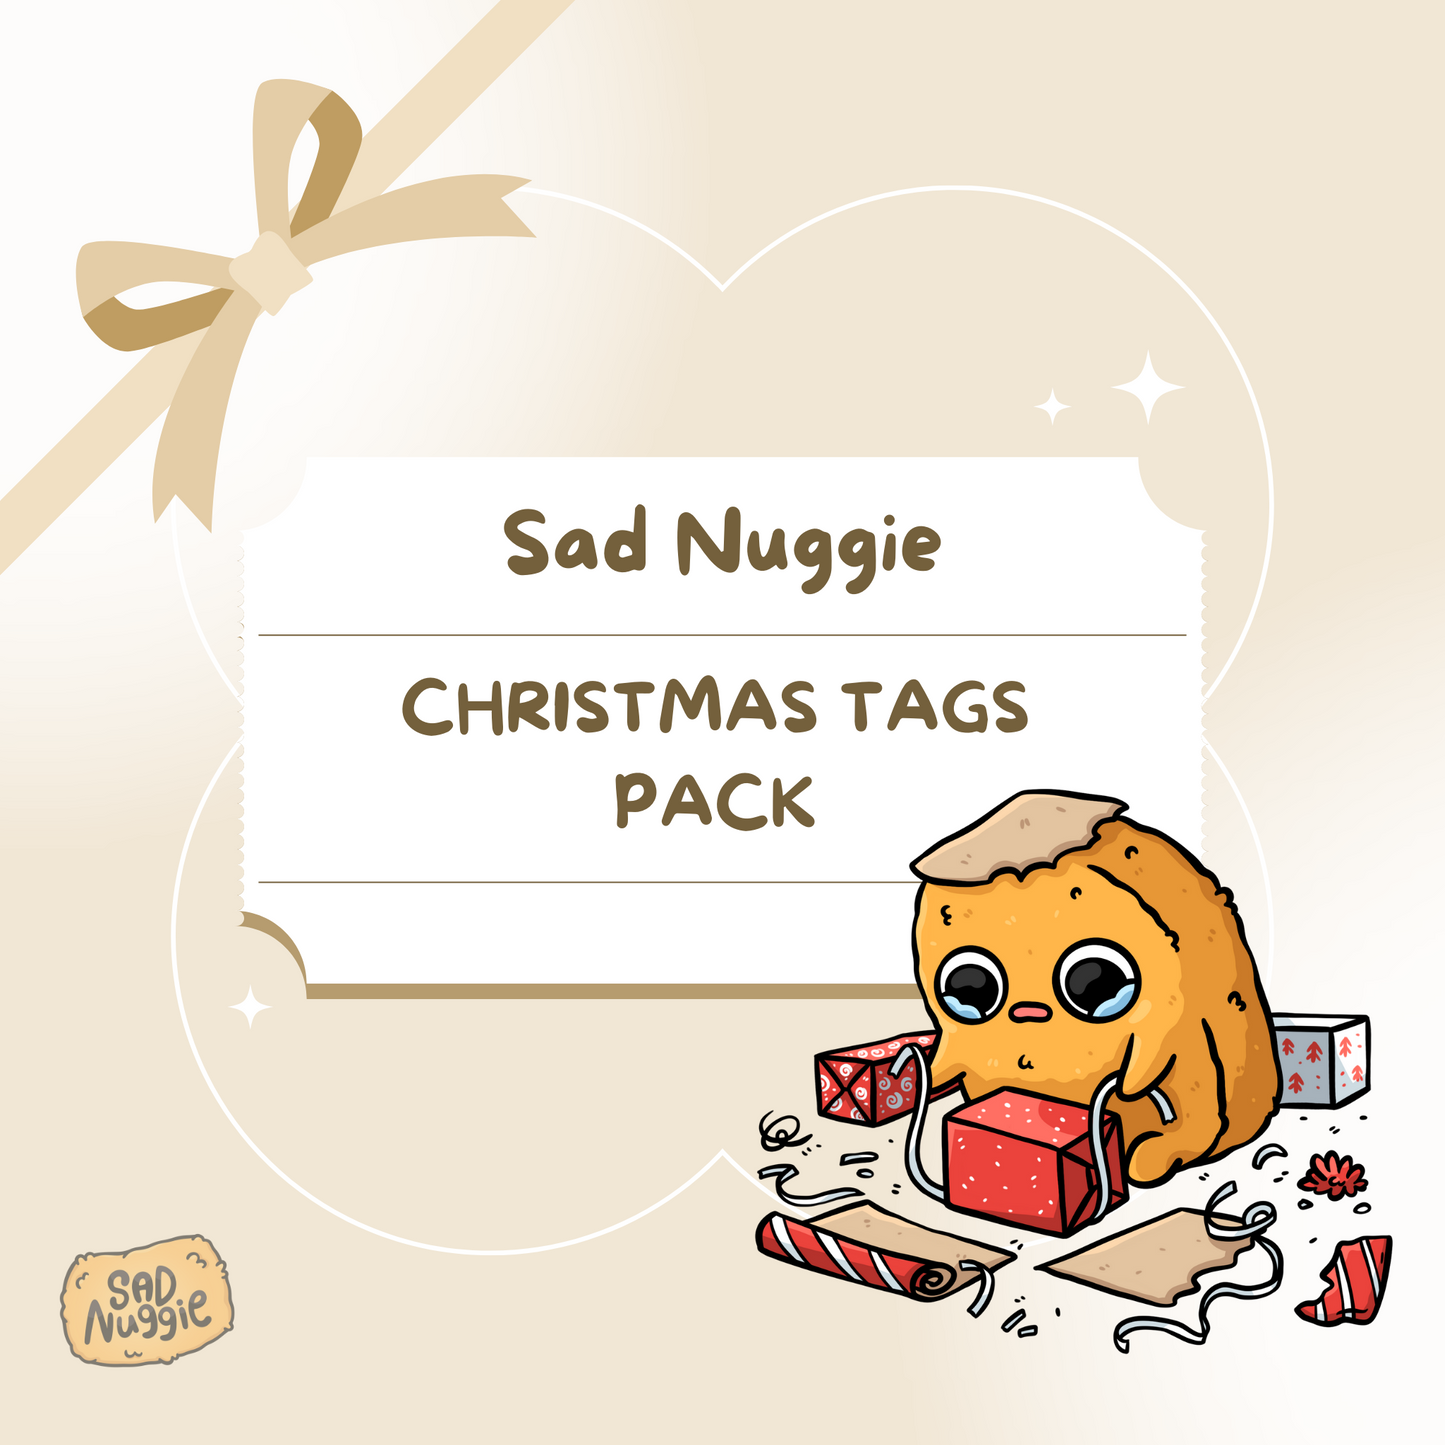 Sad Nuggie Christmas Tags Pack (Free Download)